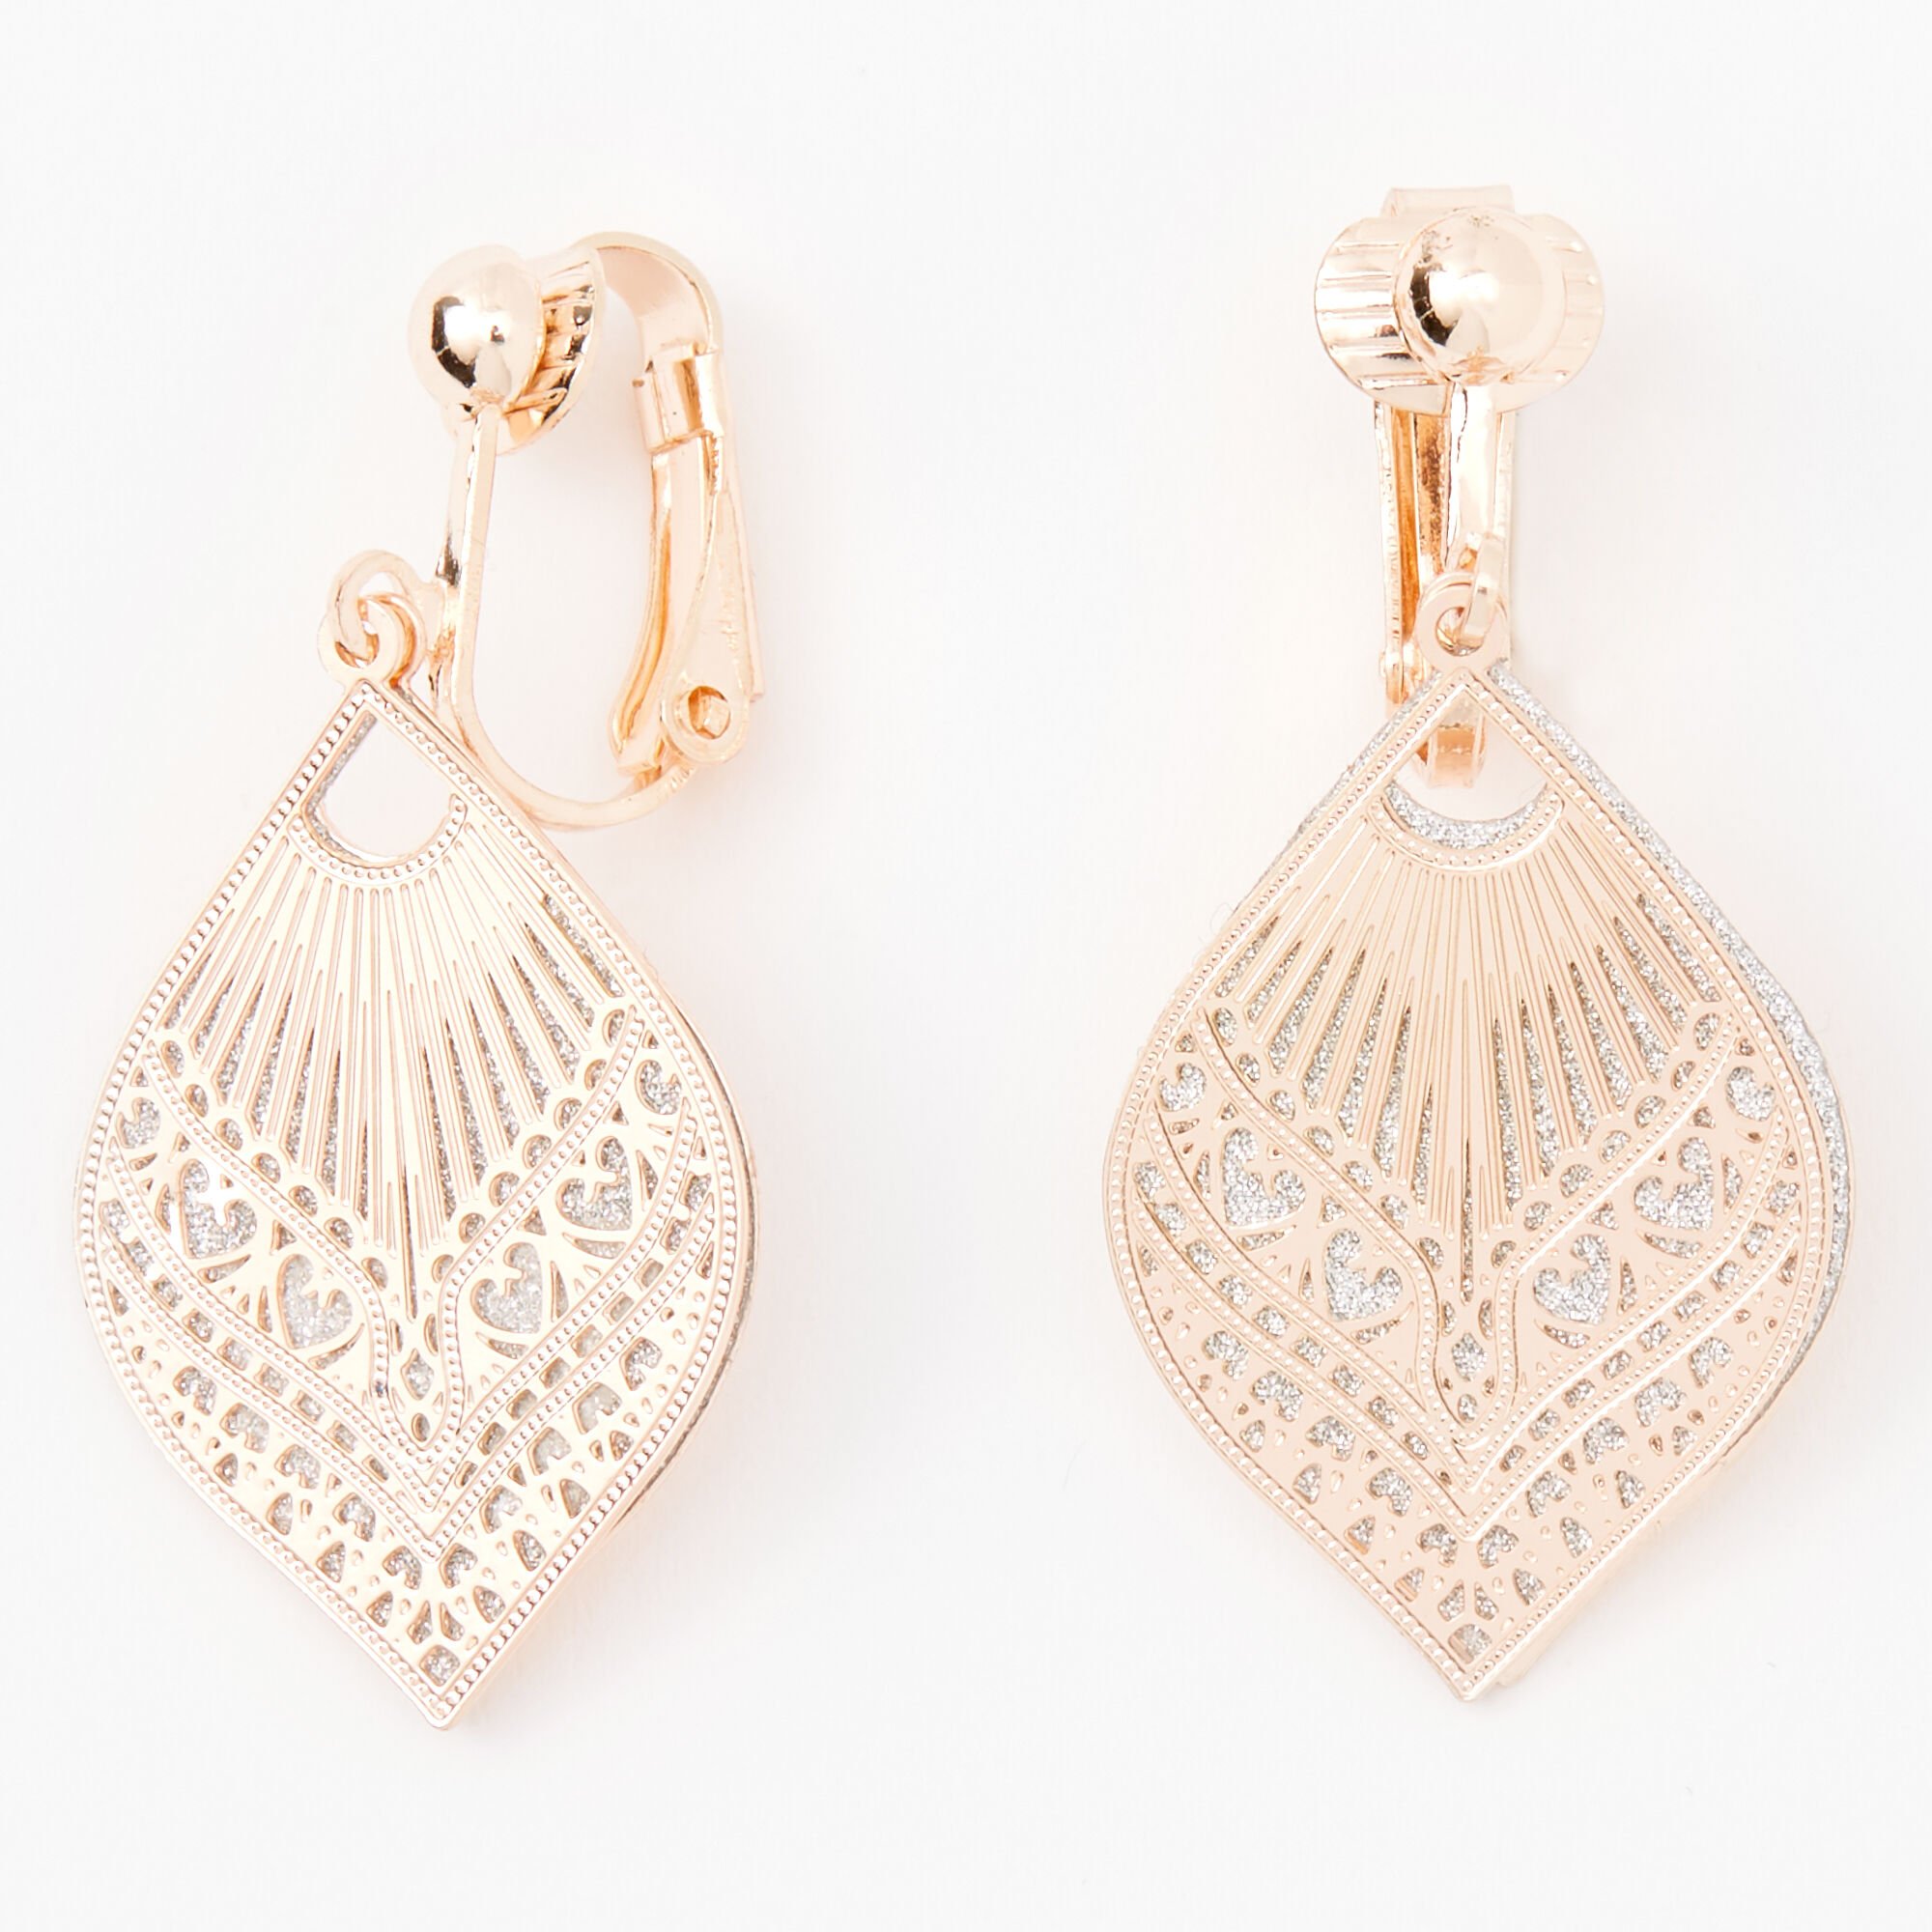 View Claires Tone 1 Filigree Teardrop Clip On Drop Earrings Rose Gold information